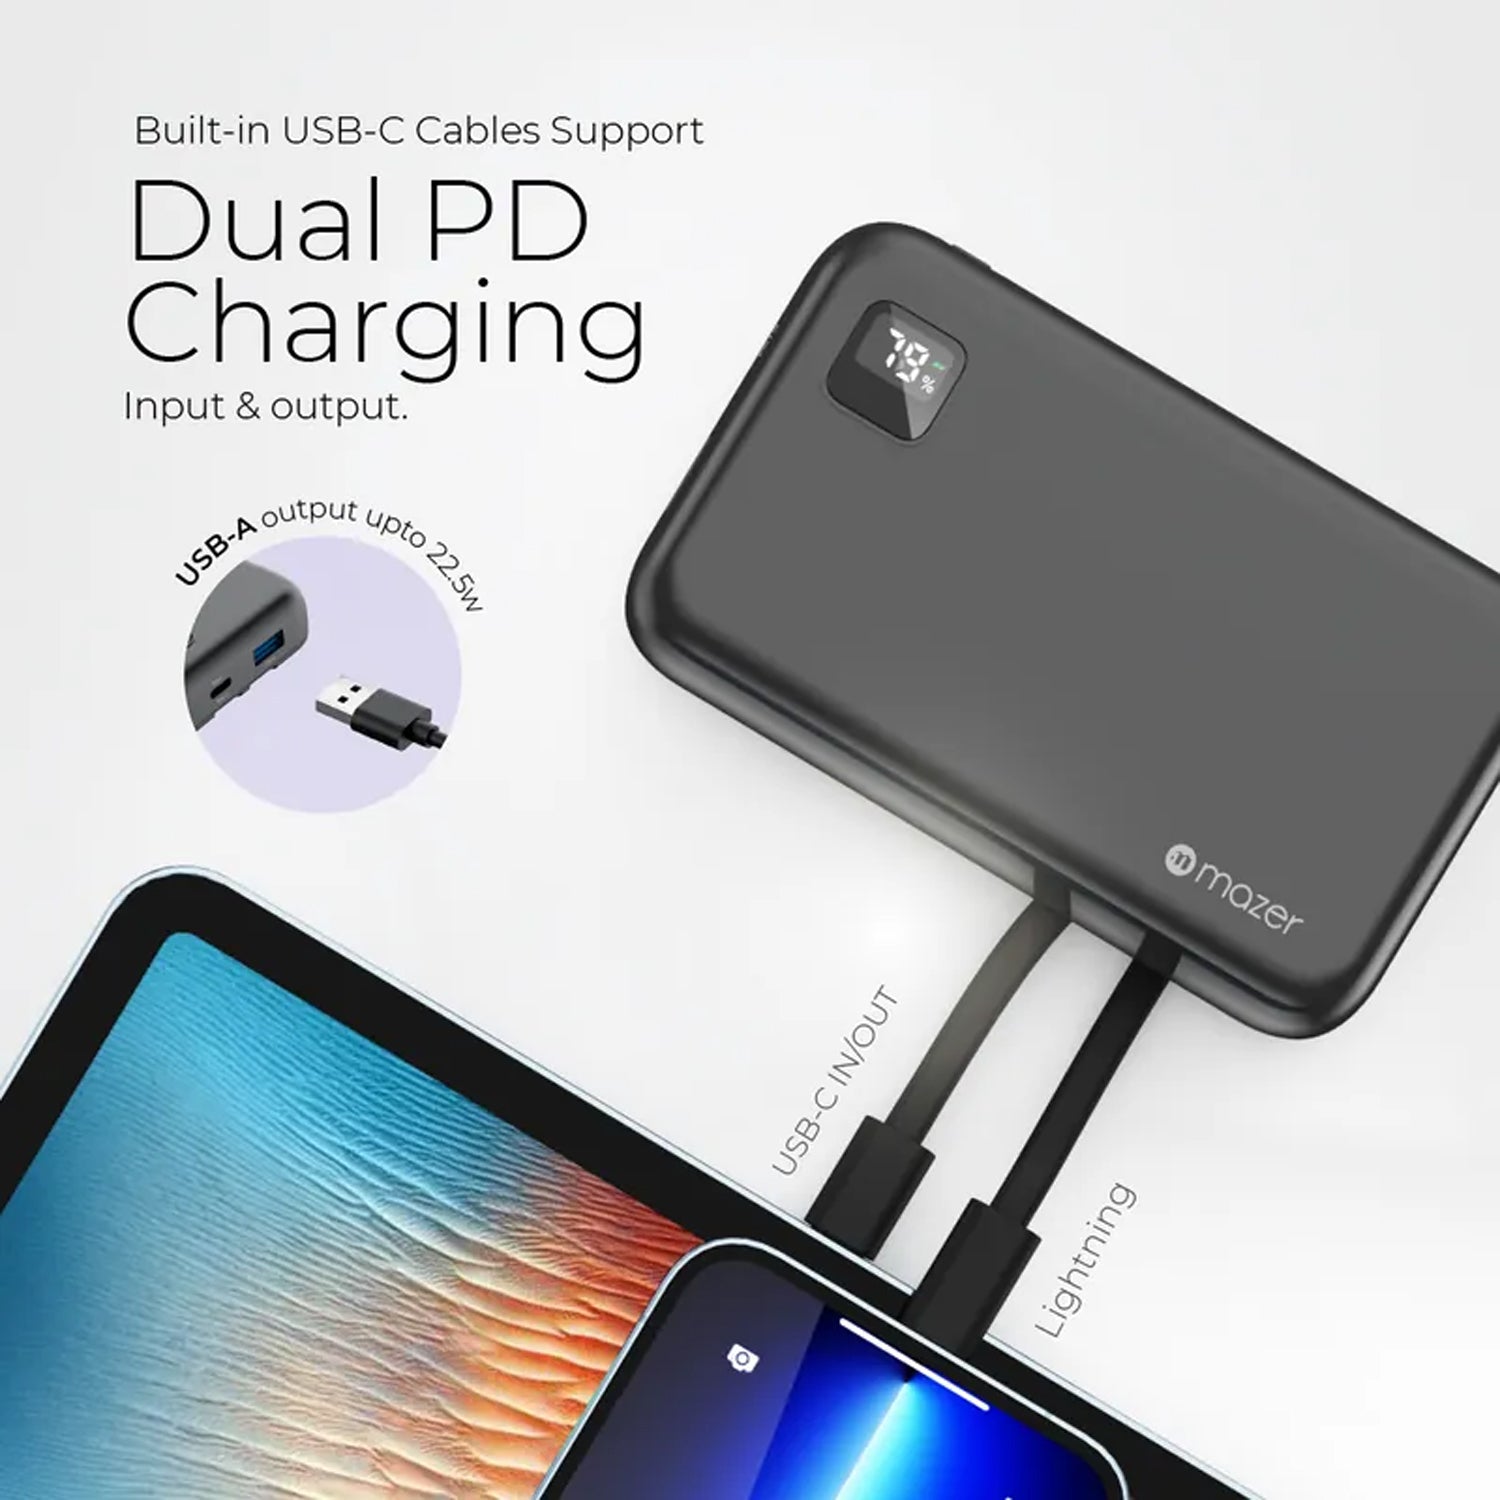 Mazer PowerCharge Link-Pocket Apple Certified MFI 10,000mAh PowerBank with Build-In Lightning & USB-C Cables